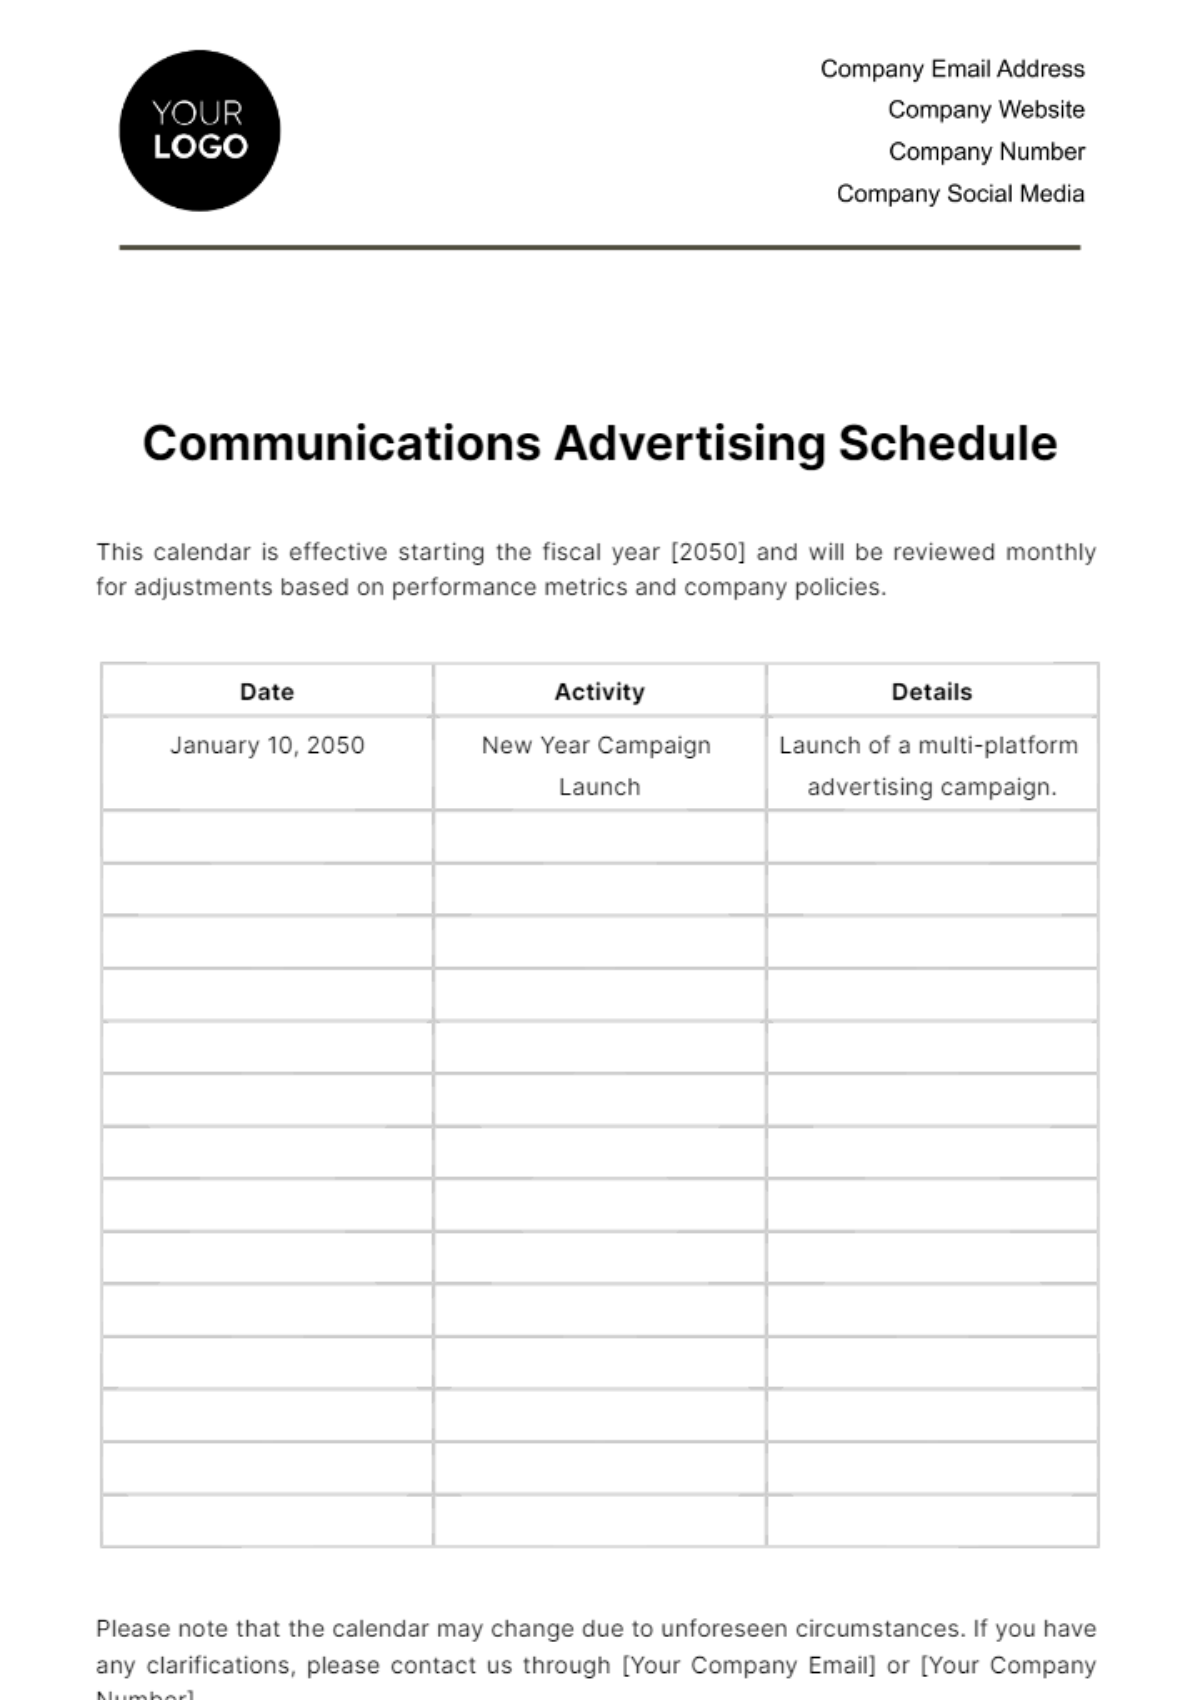 Communications Advertising Schedule Template